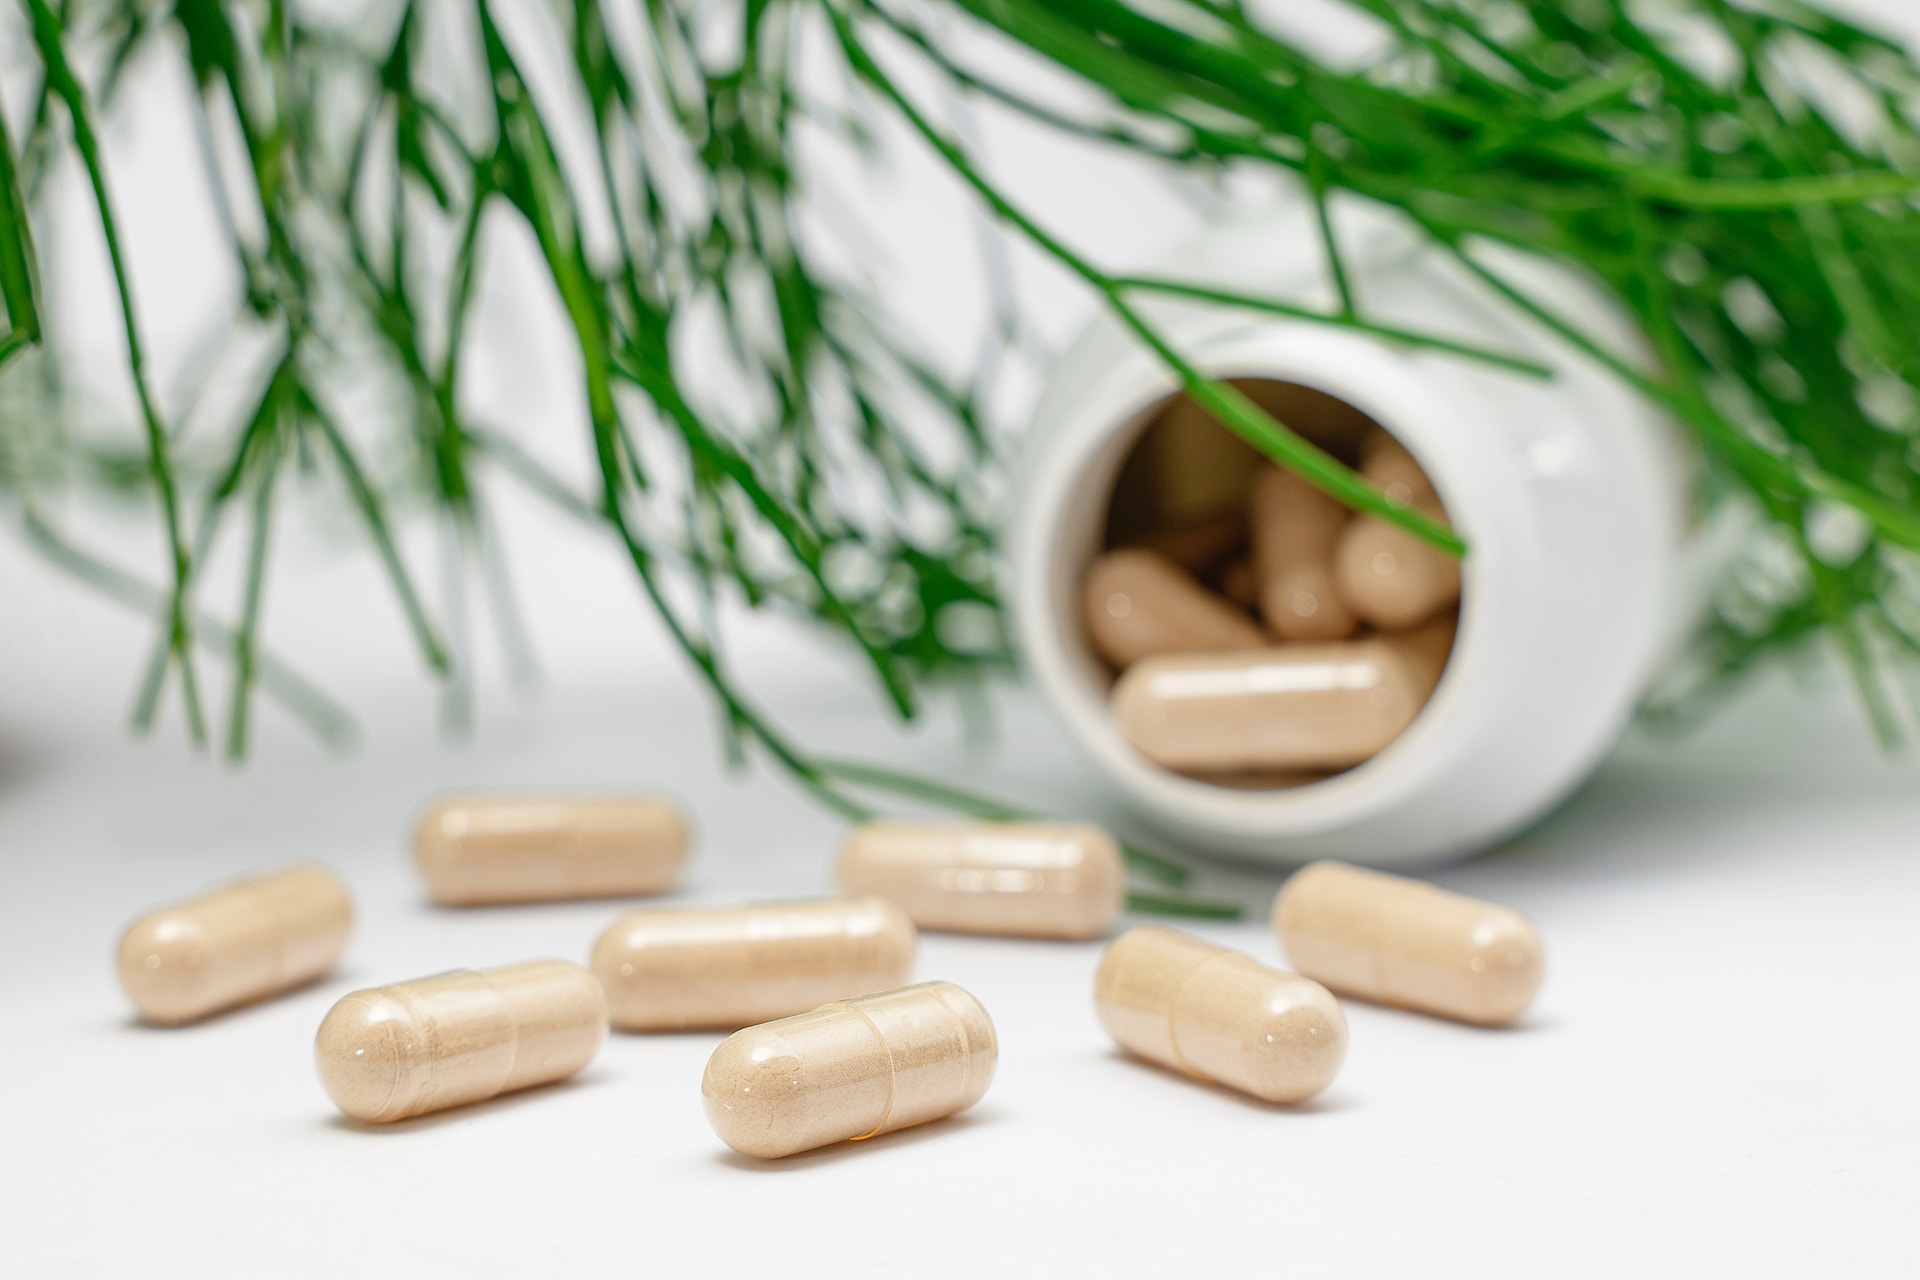 Magnesium: What Is, Functions, Benefits, Deficiency, and Dosage